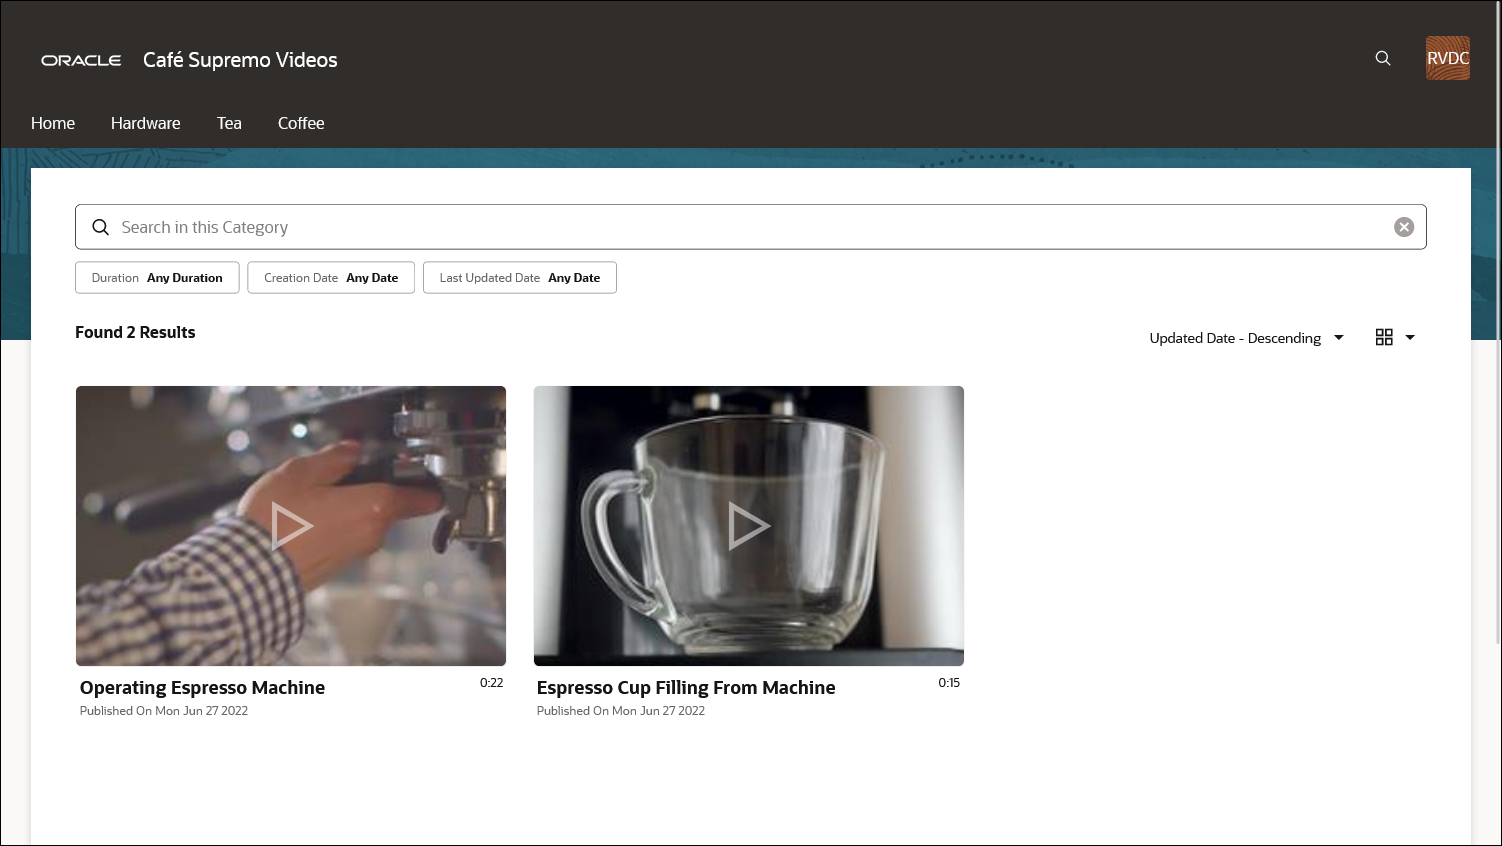 Video gallery page with Hardware taxonomy category.